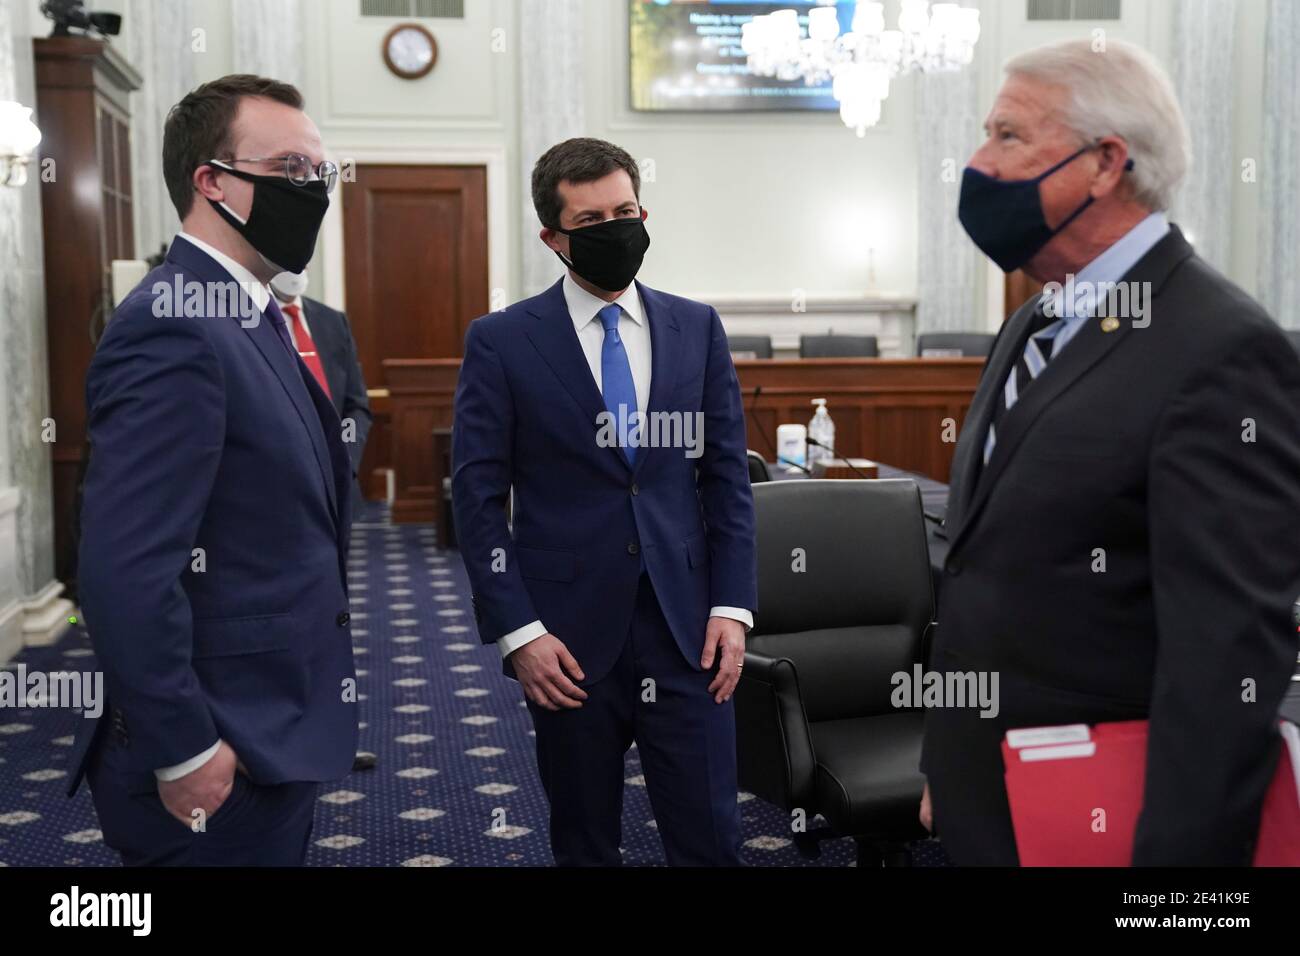 Pete Buttigieg, U.S. secretary of transportation nominee for U.S. President Joe Biden, center, wears a protective mask while talking to United States Senator Roger Wicker (Republican of Mississippi), Chairman, US Senate Committee on Commerce, Science, & Transportation, right, during a confirmation hearing in Washington, DC, U.S., on Thursday, Jan. 21, 2021. Buttigieg, is pledging to carry out the administration's ambitious agenda to rebuild the nation's infrastructure, calling it a 'generational opportunity' to create new jobs, fight economic inequality and stem climate change. Credit: Stefa Stock Photo